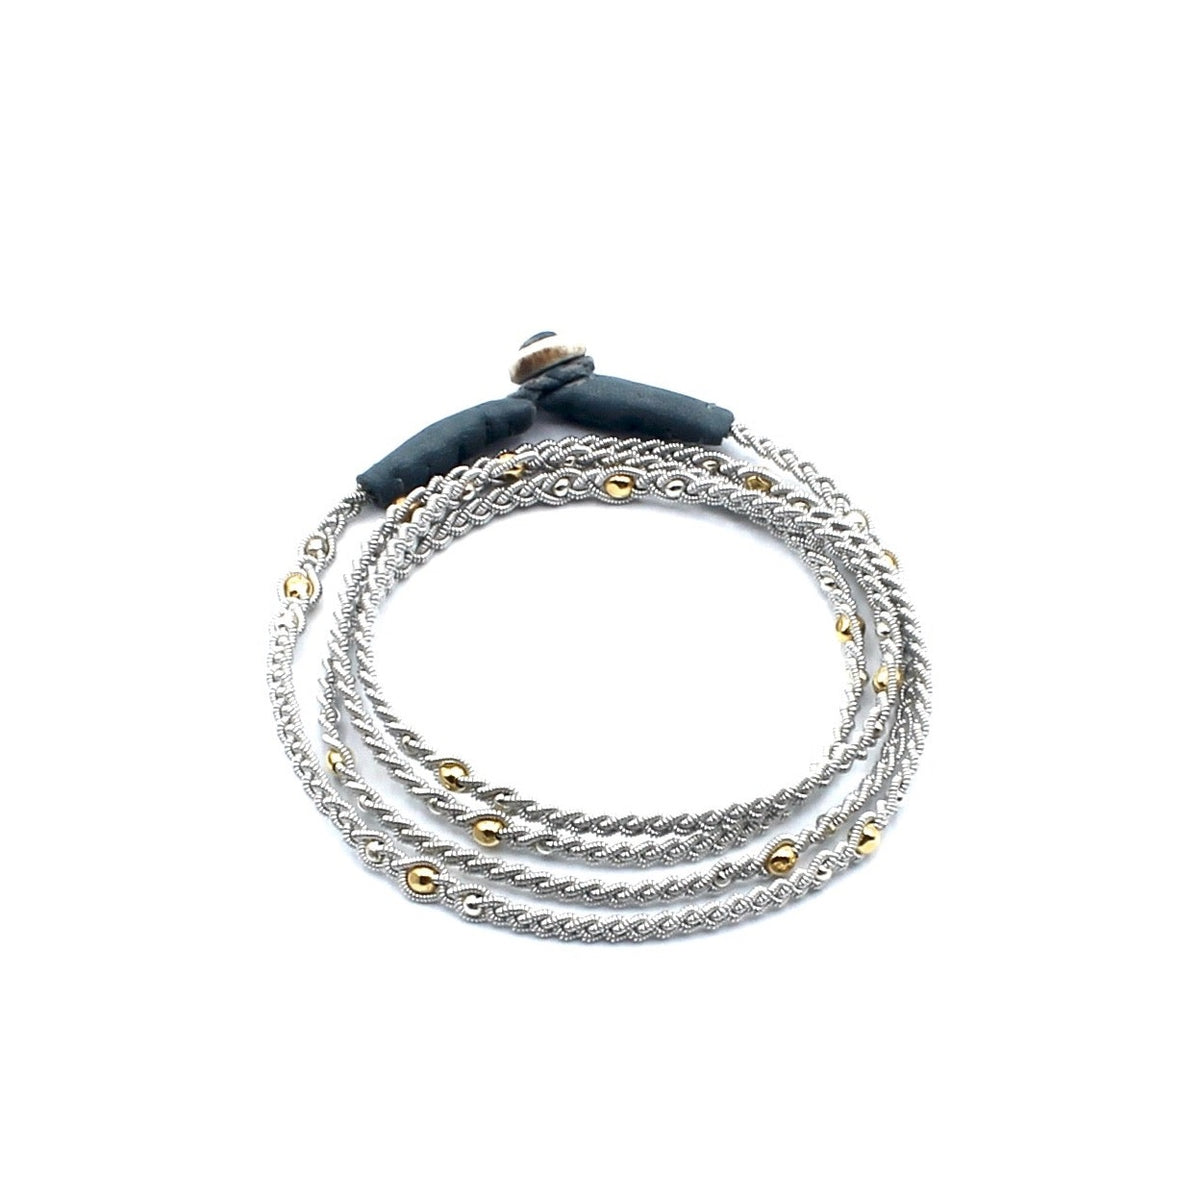 Wrap Bracelet with Silver and Gold Beads